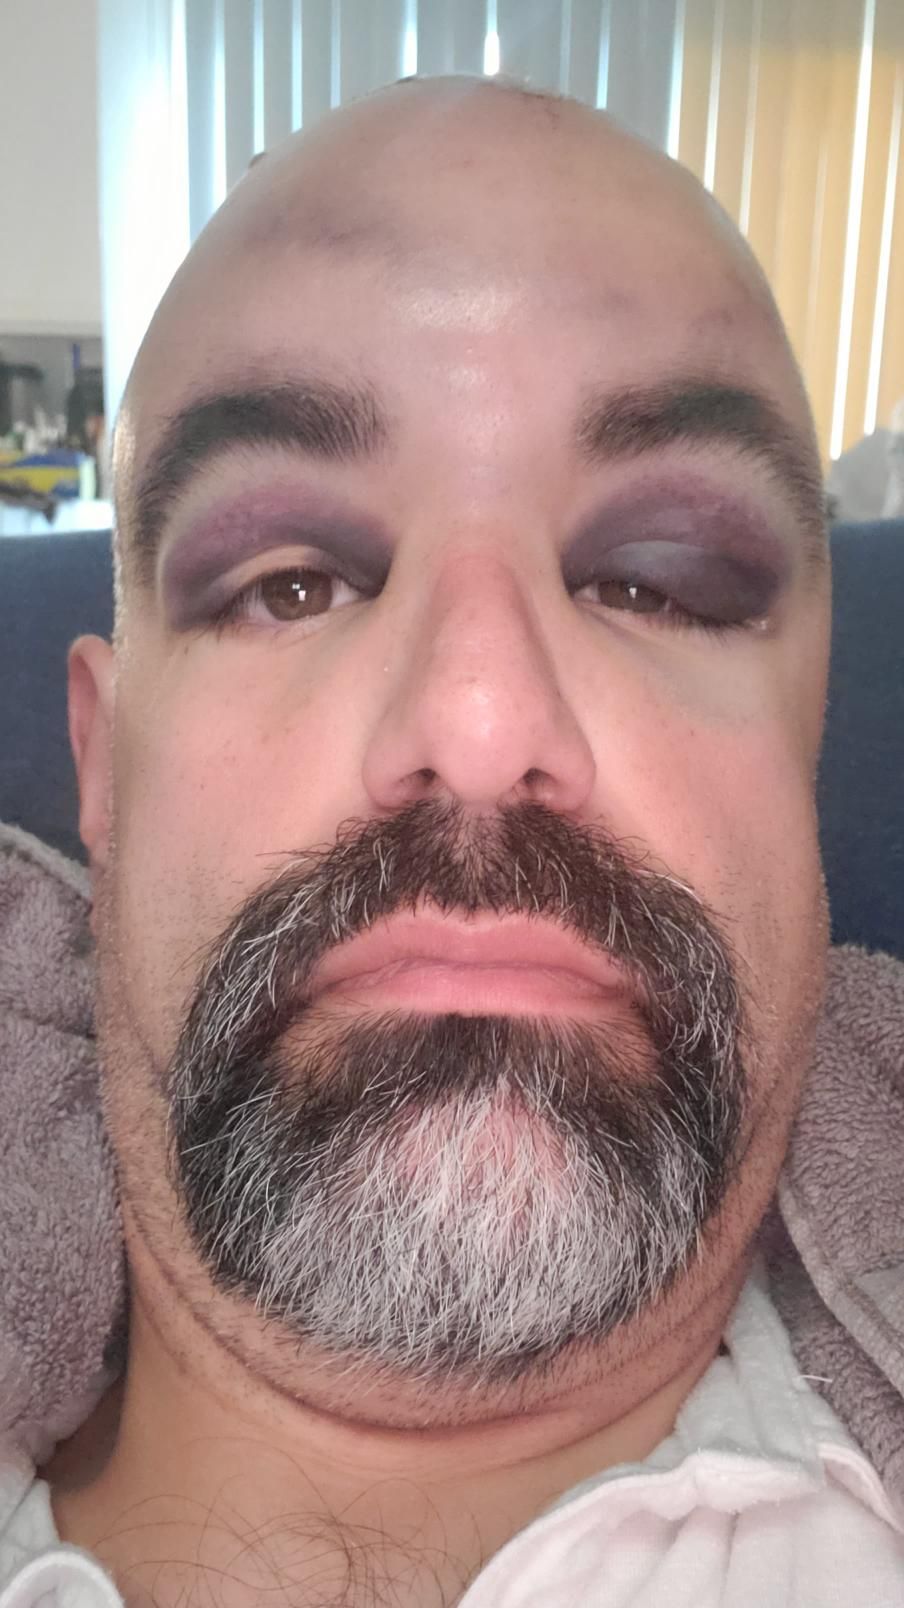 Was rear ended in a car accident this morning. Eye shadow on point.